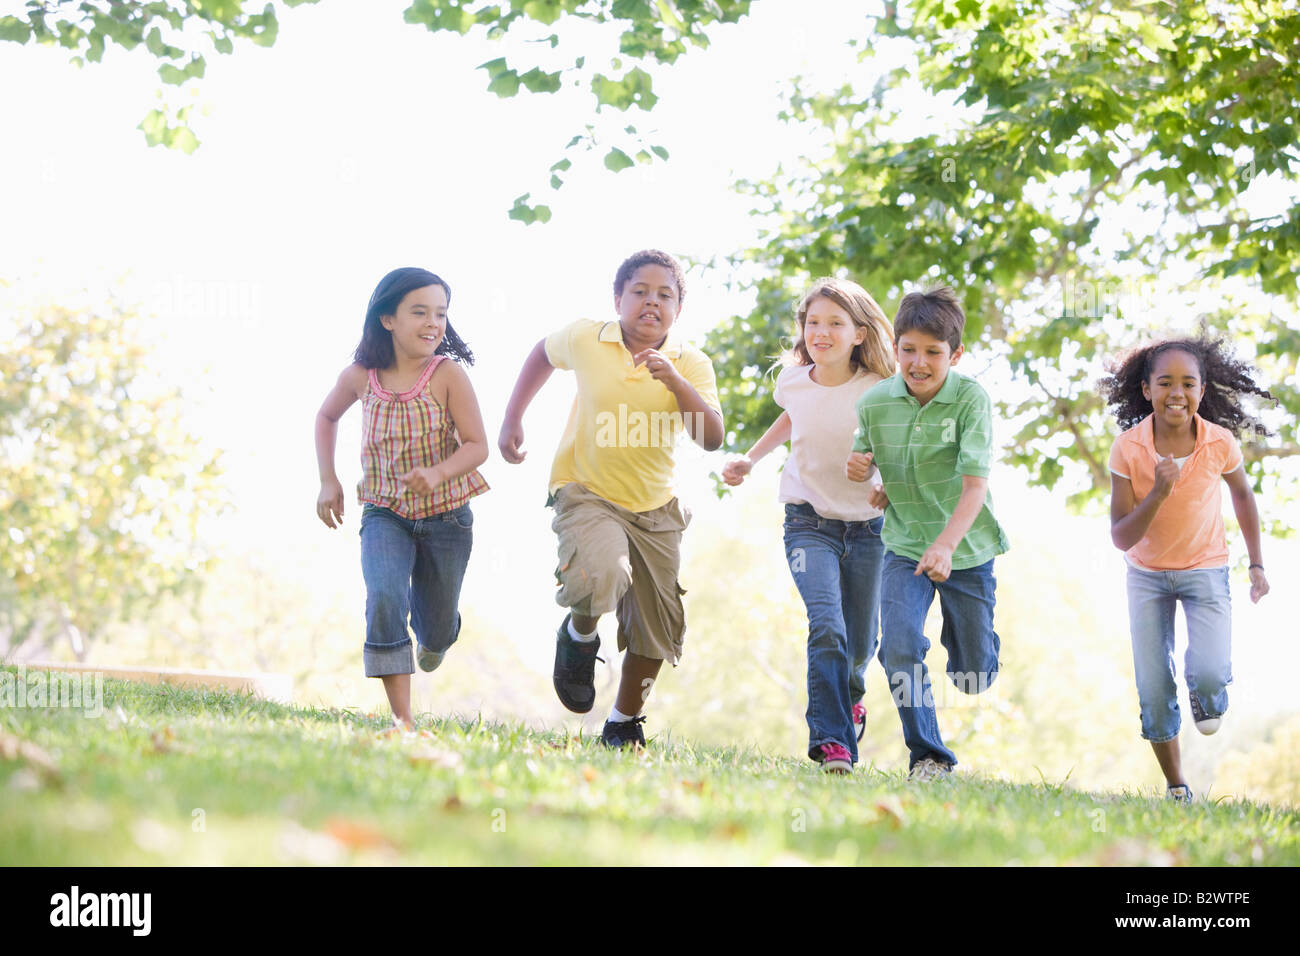 Five young friends running outdoors smiling Stock Photo